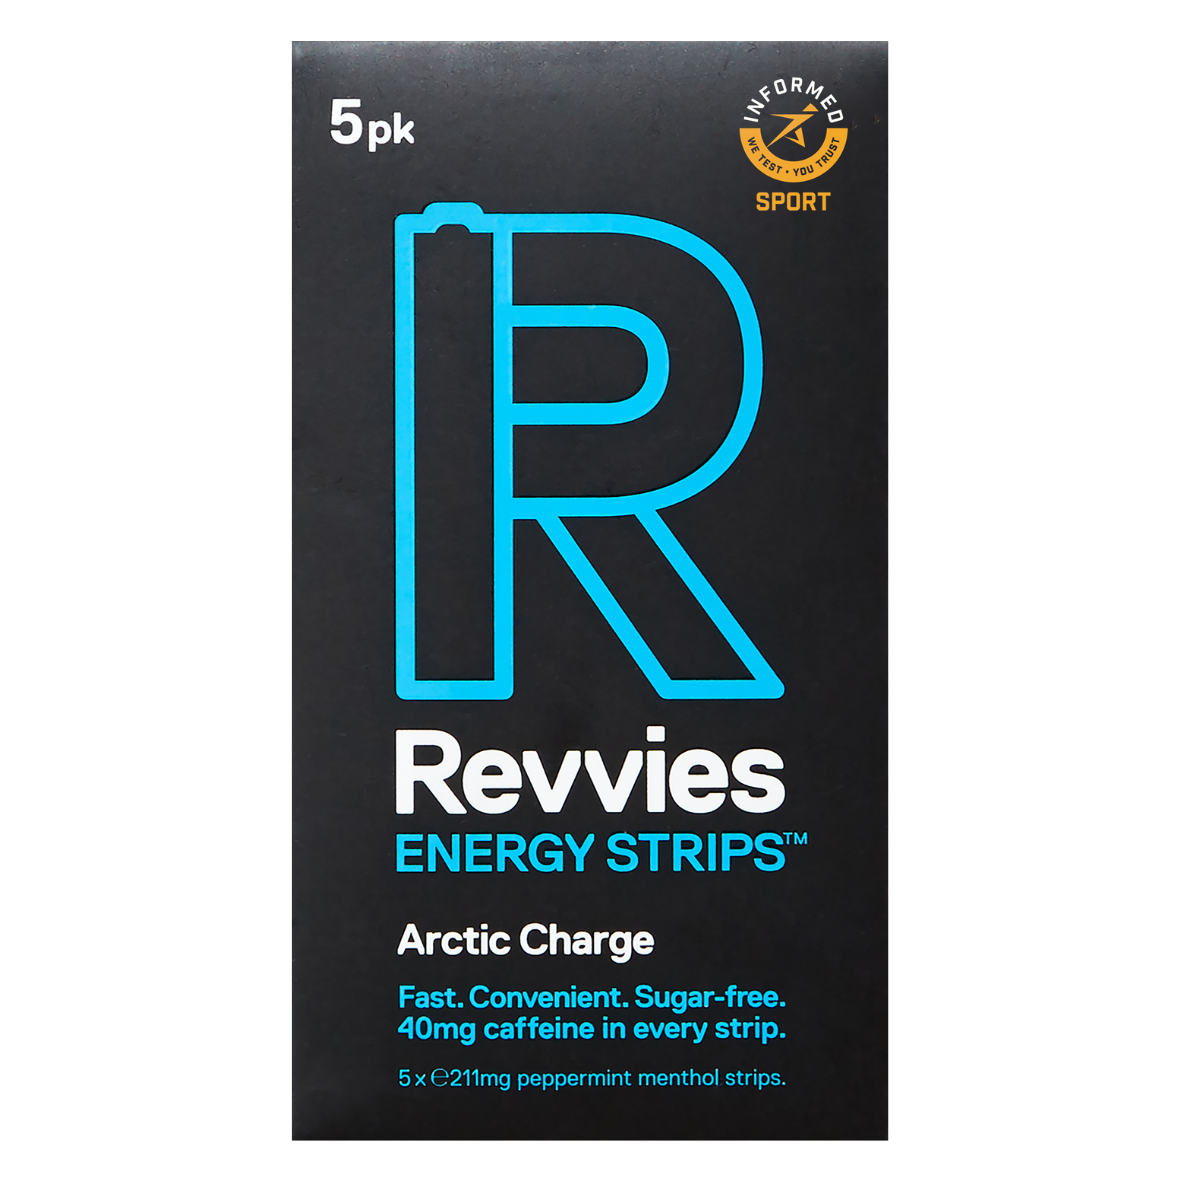 Revvies Arctic Charge Energy Strips 40mg caffeine